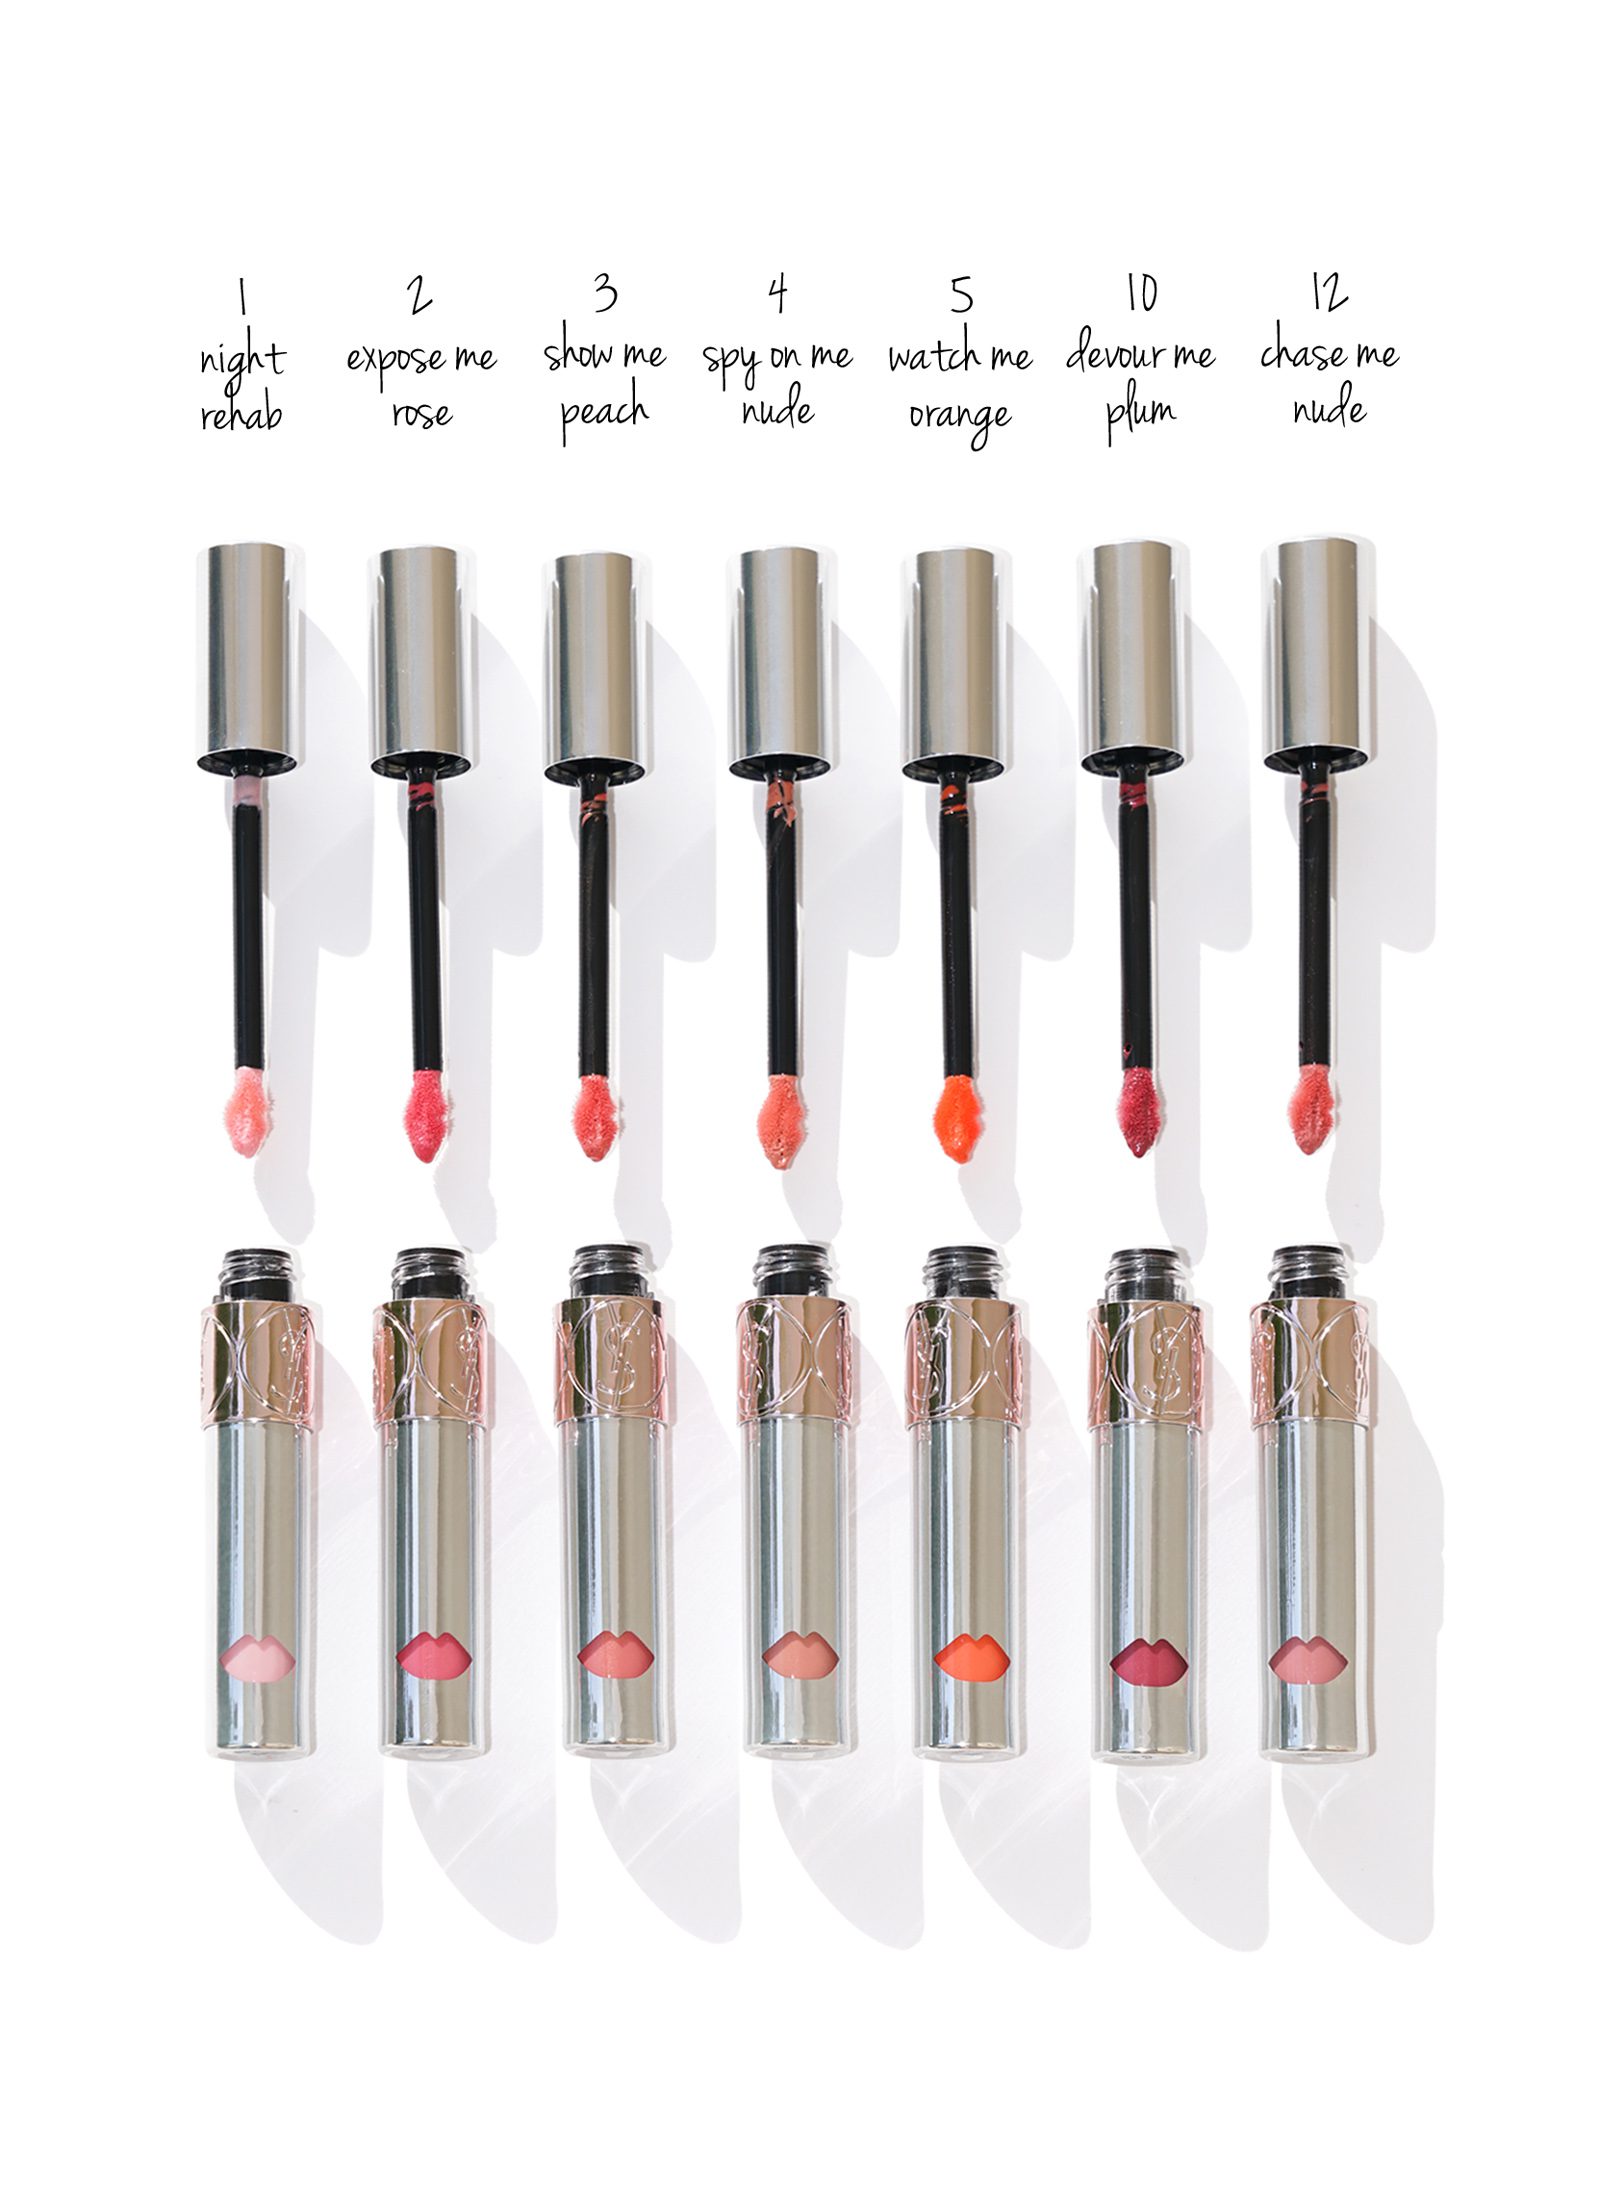 YSL Volupte Tint-In-Balm - The Beauty Look Book